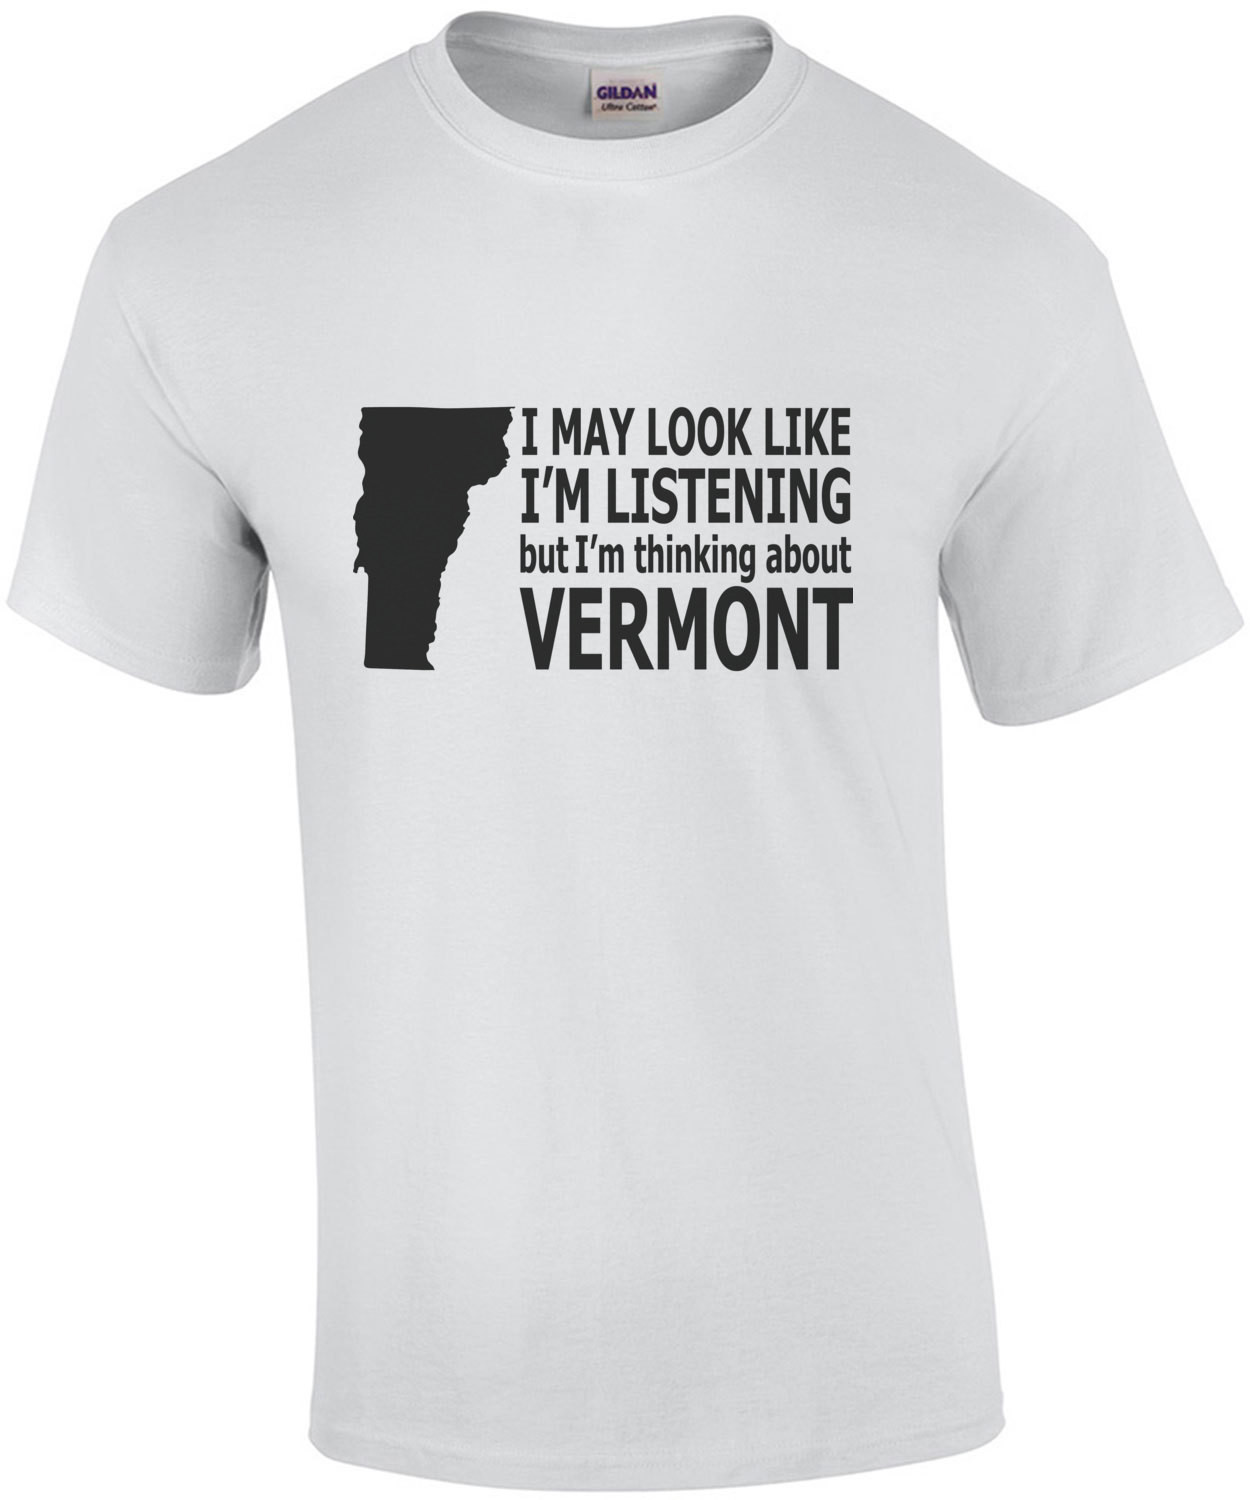 I may look like I'm listening but I'm thinking about Vermont - Vermont T-Shirt